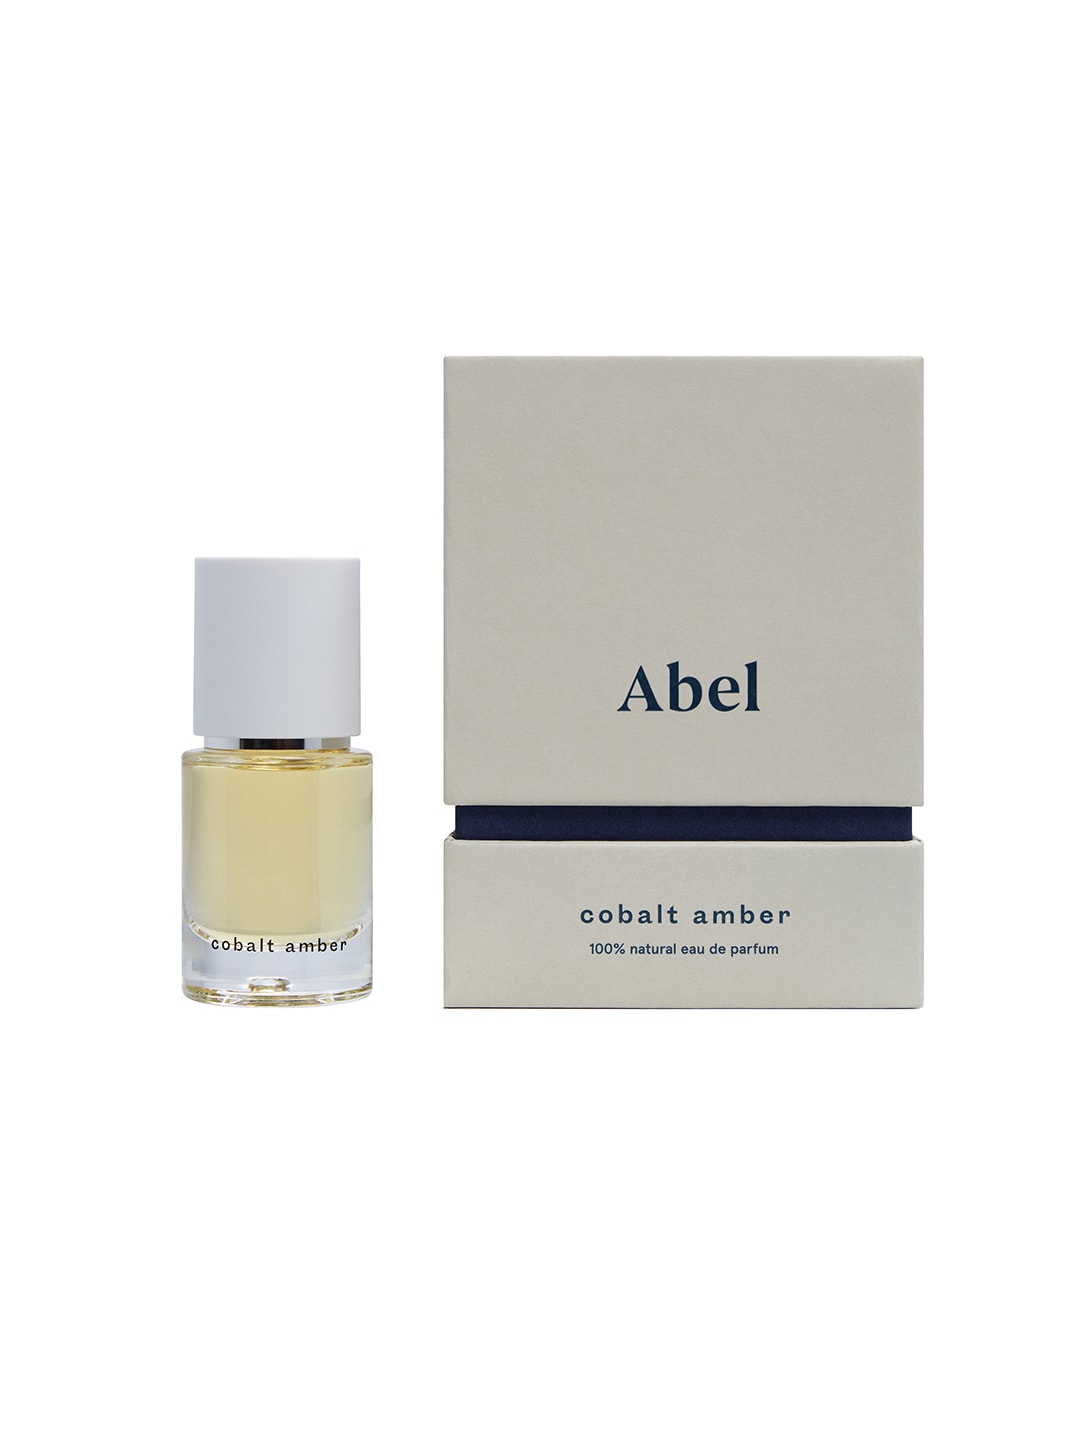 Cobalt Amber eau de parfum by Abel embodies the combination of delicate pink pepper and enchanting juniper berry, resulting in a sophisticated oriental fragrance.